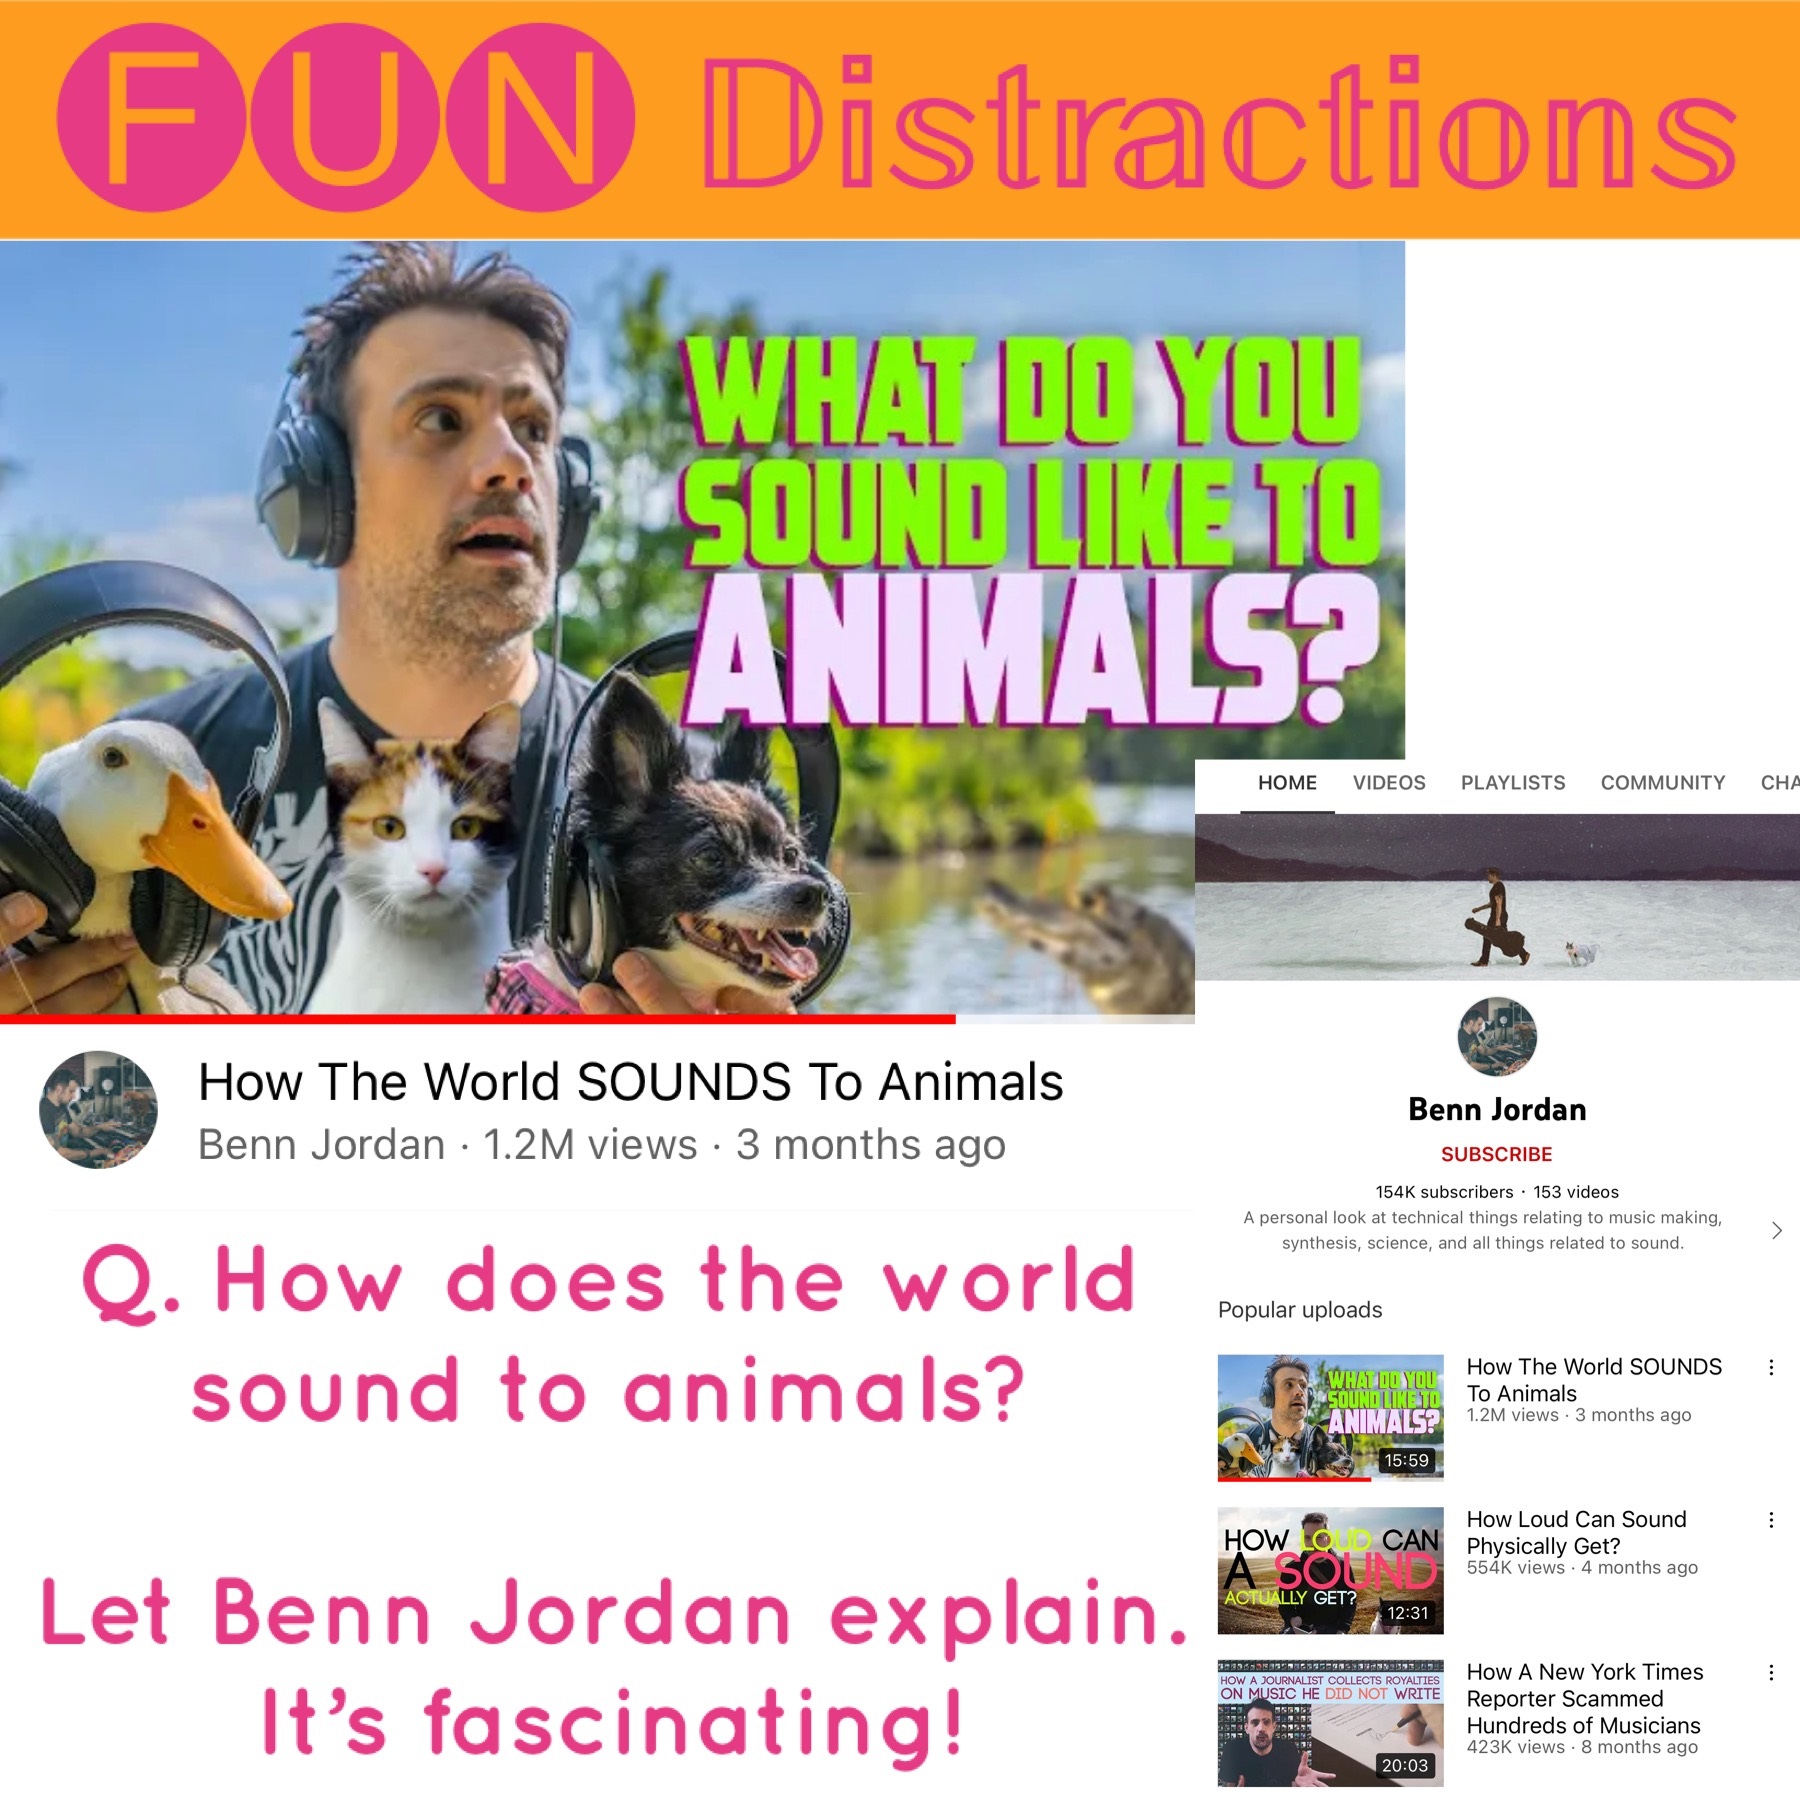 How does the world sound to animals?